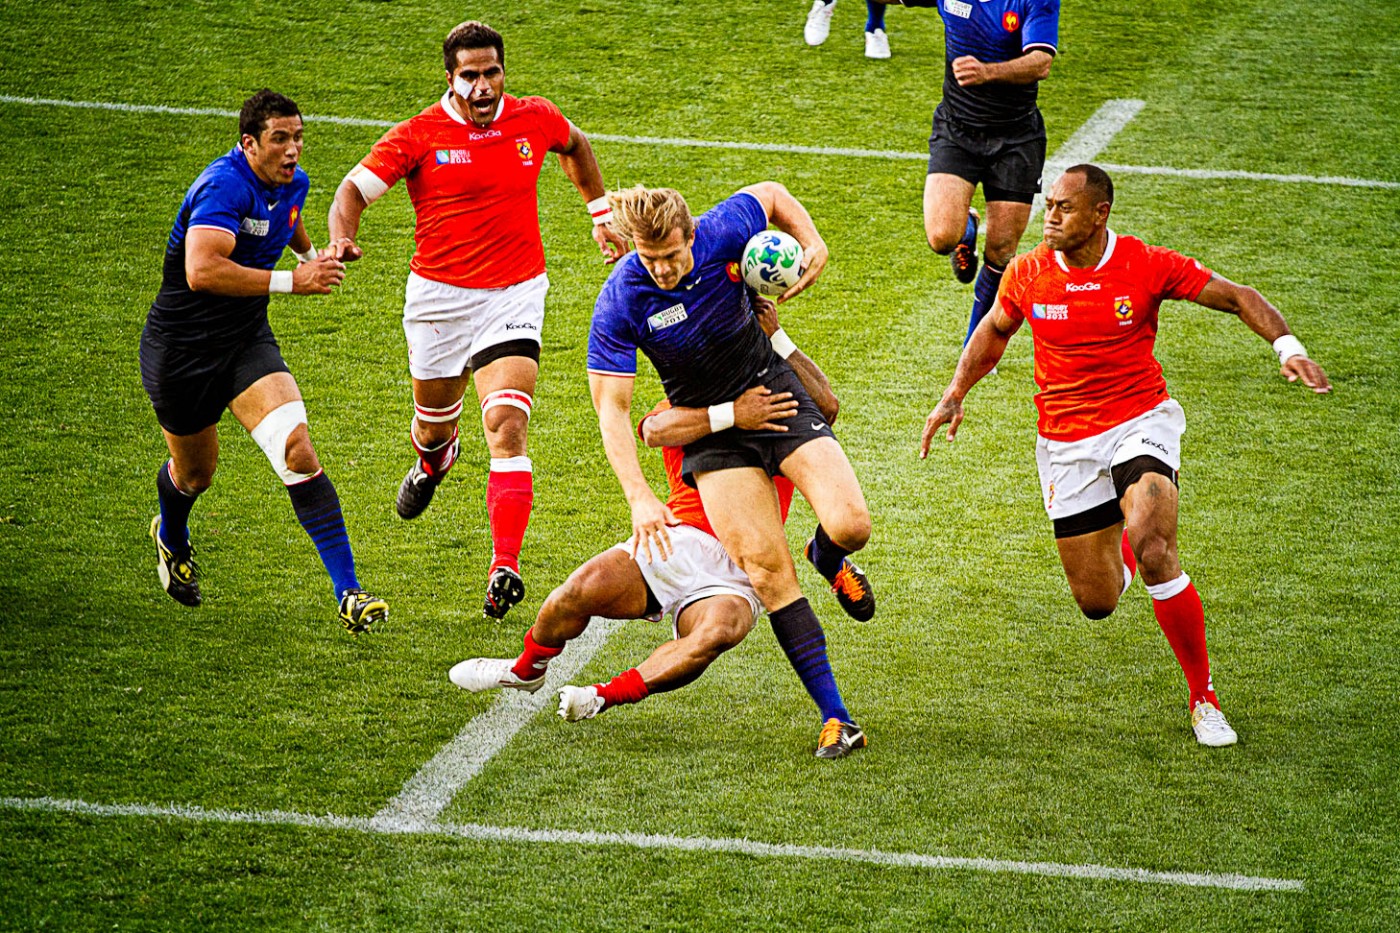 French rugby player being tackled by Tongan player